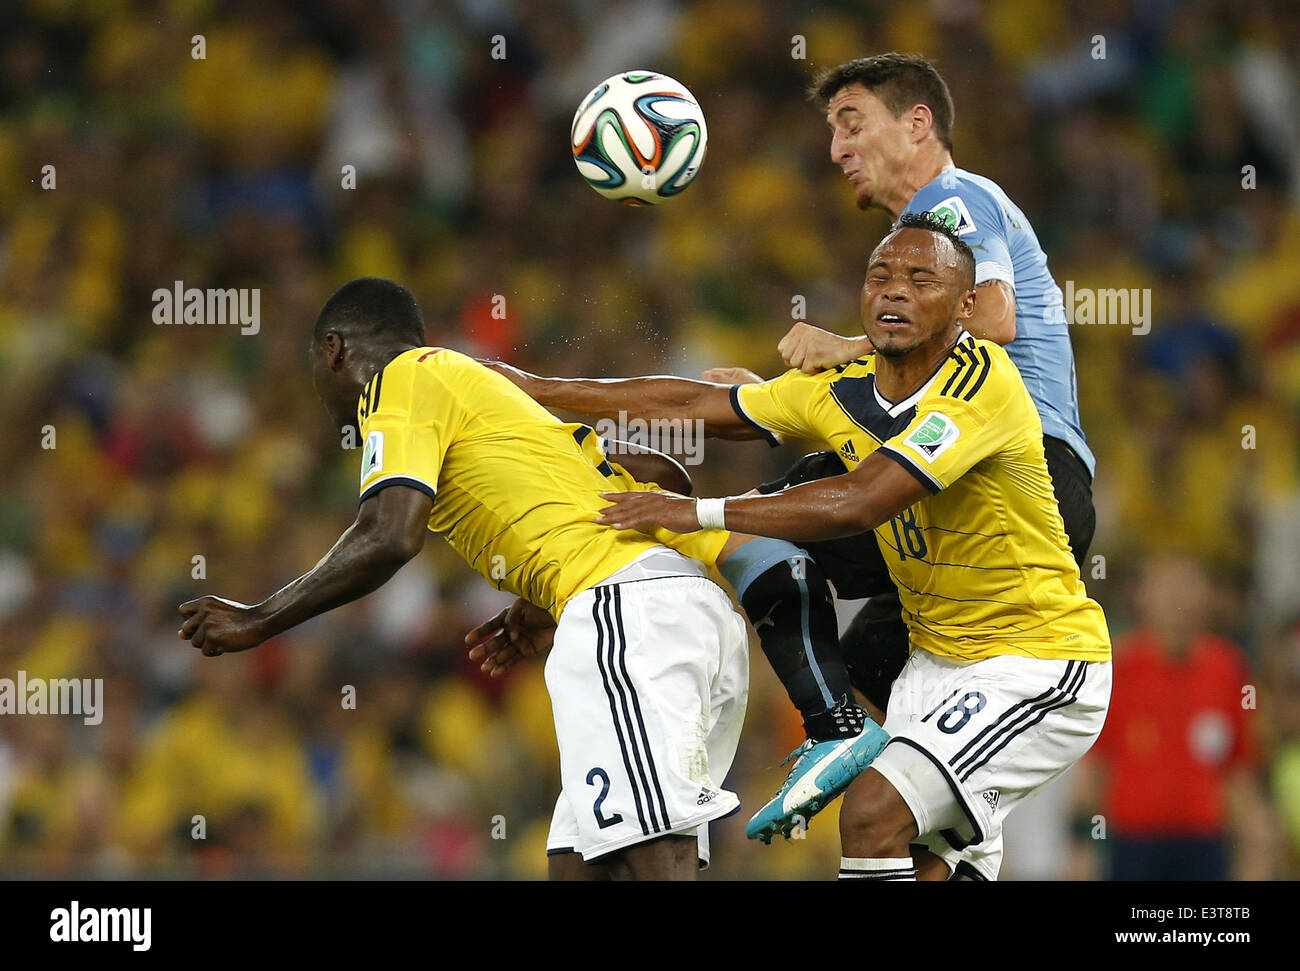 Rio De Janeiro, Brazil. 28th June, 2014. Uruguay's Cristian Rodriguez (back) competes for a header with Colombia's Cristian Zapata (L, front) and Juan Zuniga during a Round of 16 match between Colombia and Uruguay of 2014 FIFA World Cup at the Estadio do Maracana Stadium in Rio de Janeiro, Brazil, on June 28, 2014. Credit:  Wang Lili/Xinhua/Alamy Live News Stock Photo